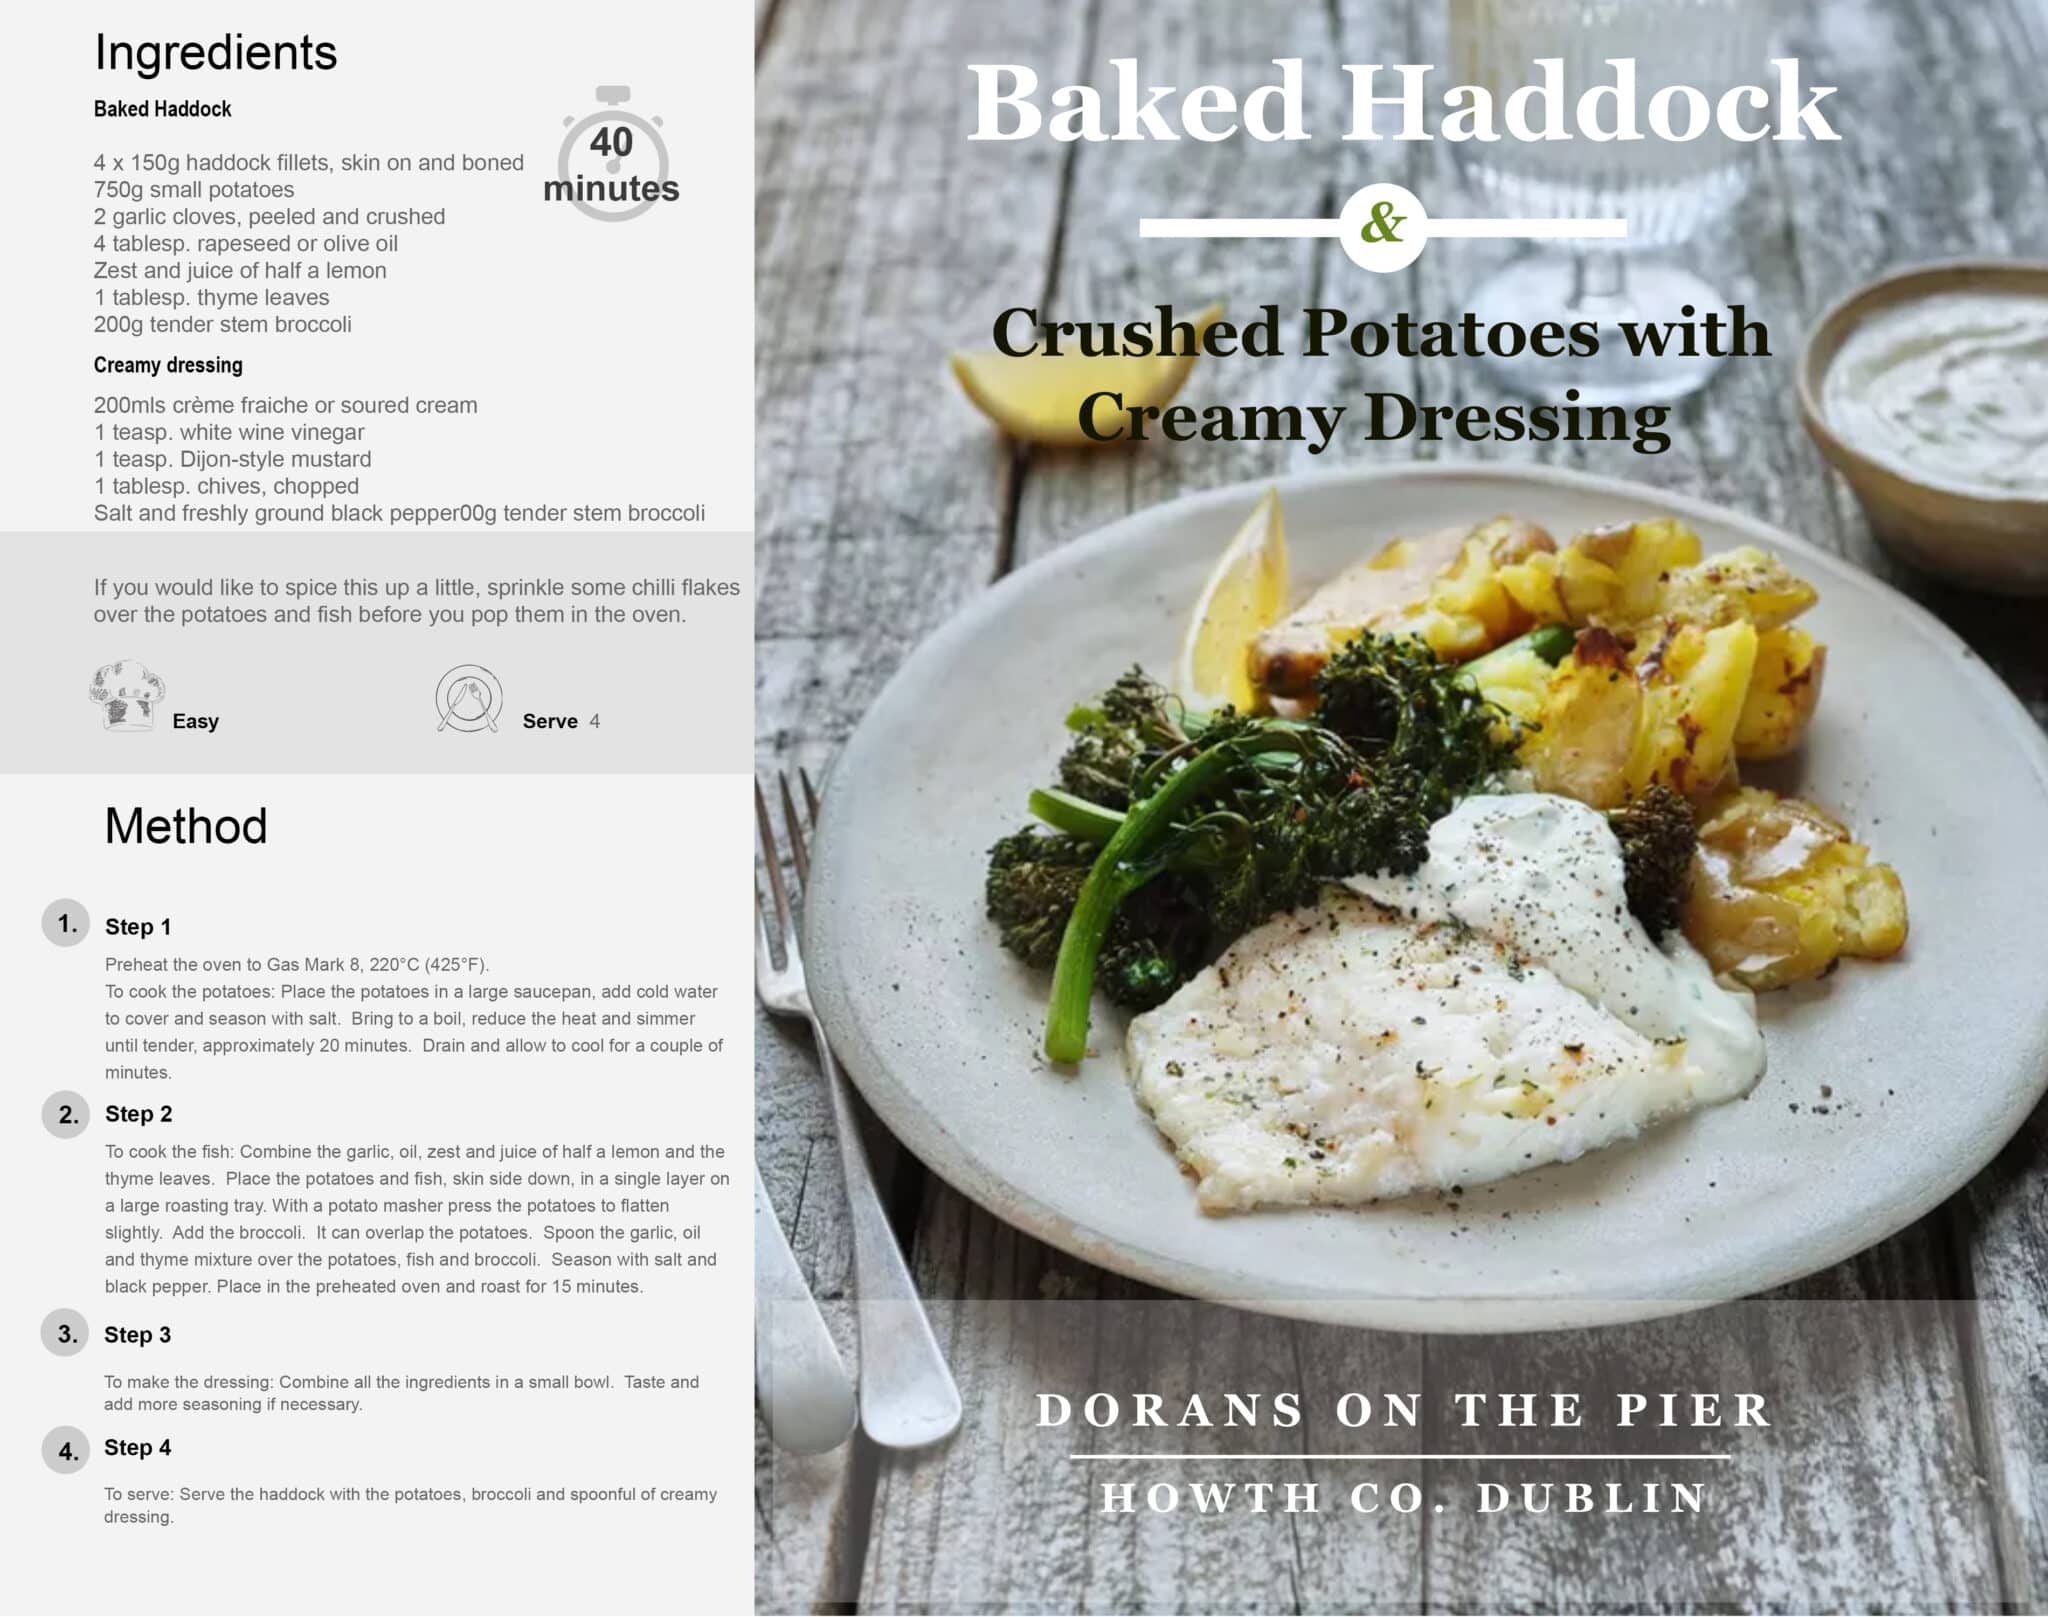 Baked Haddock & Crushed Potatoes With Creamy Dressing